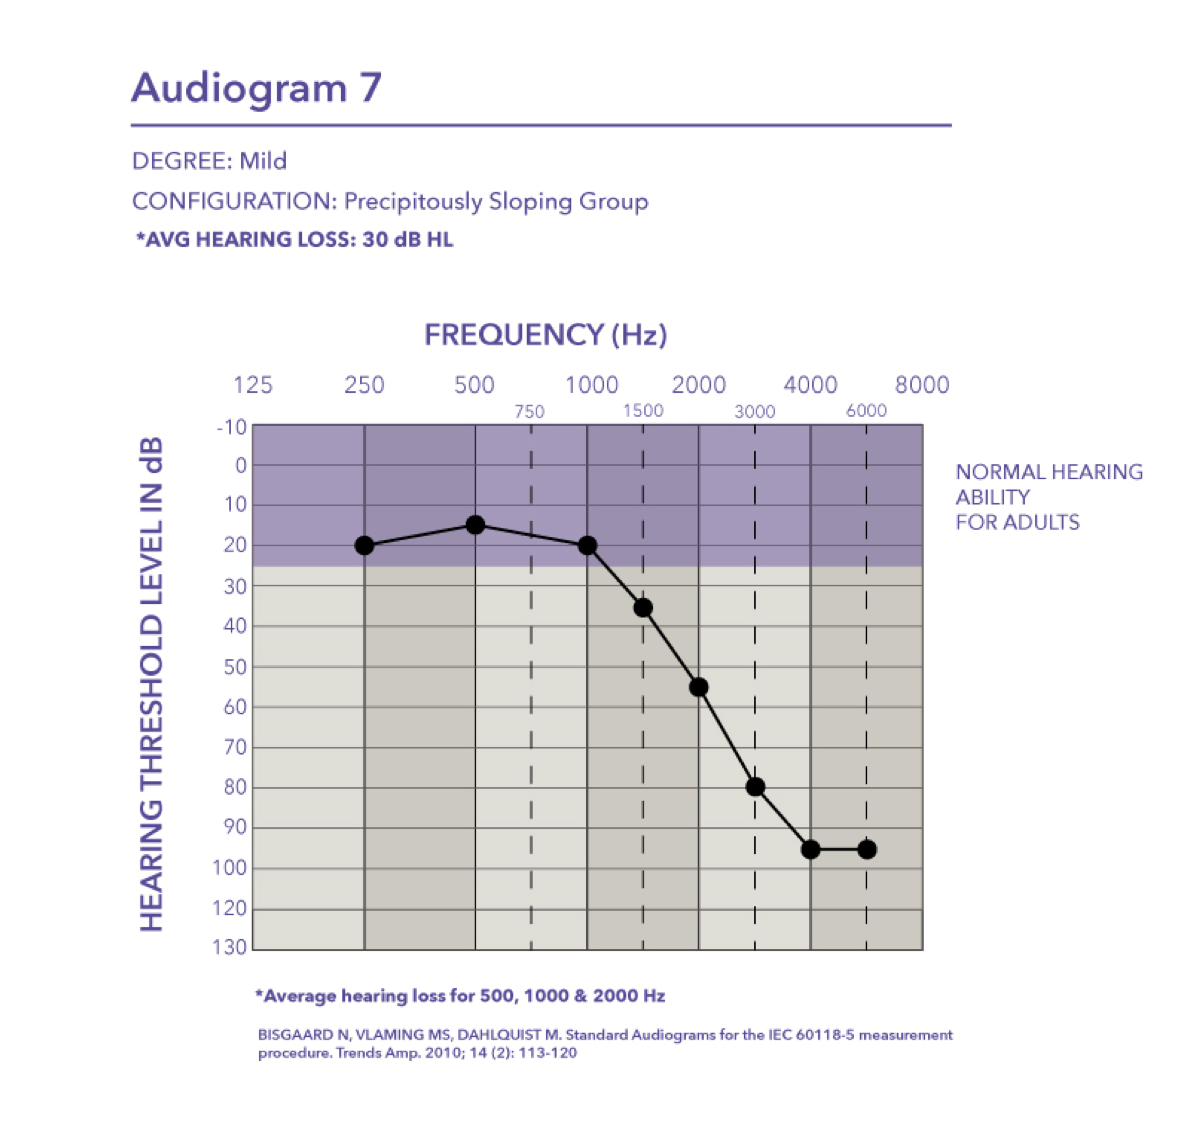 Mild hearing loss with a pure tone average of 30 dB HL